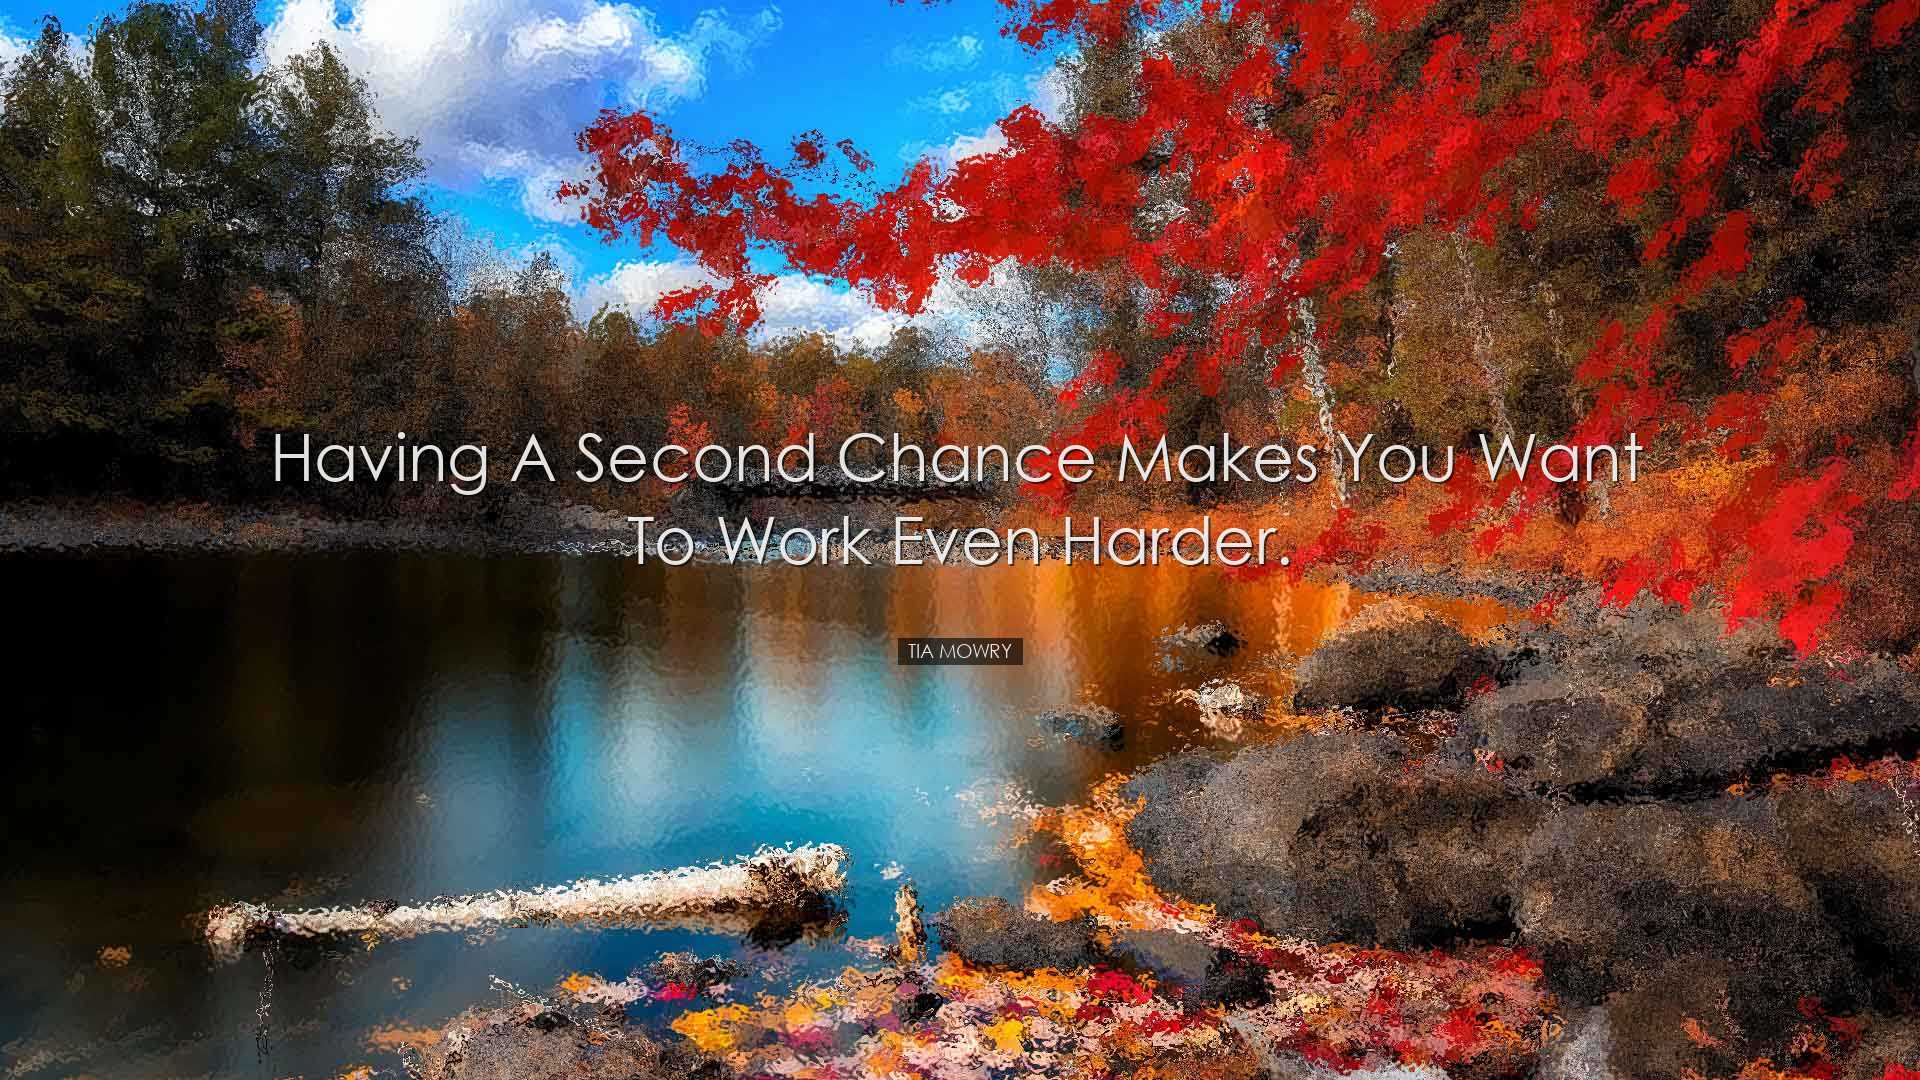 Having a second chance makes you want to work even harder. - Tia M